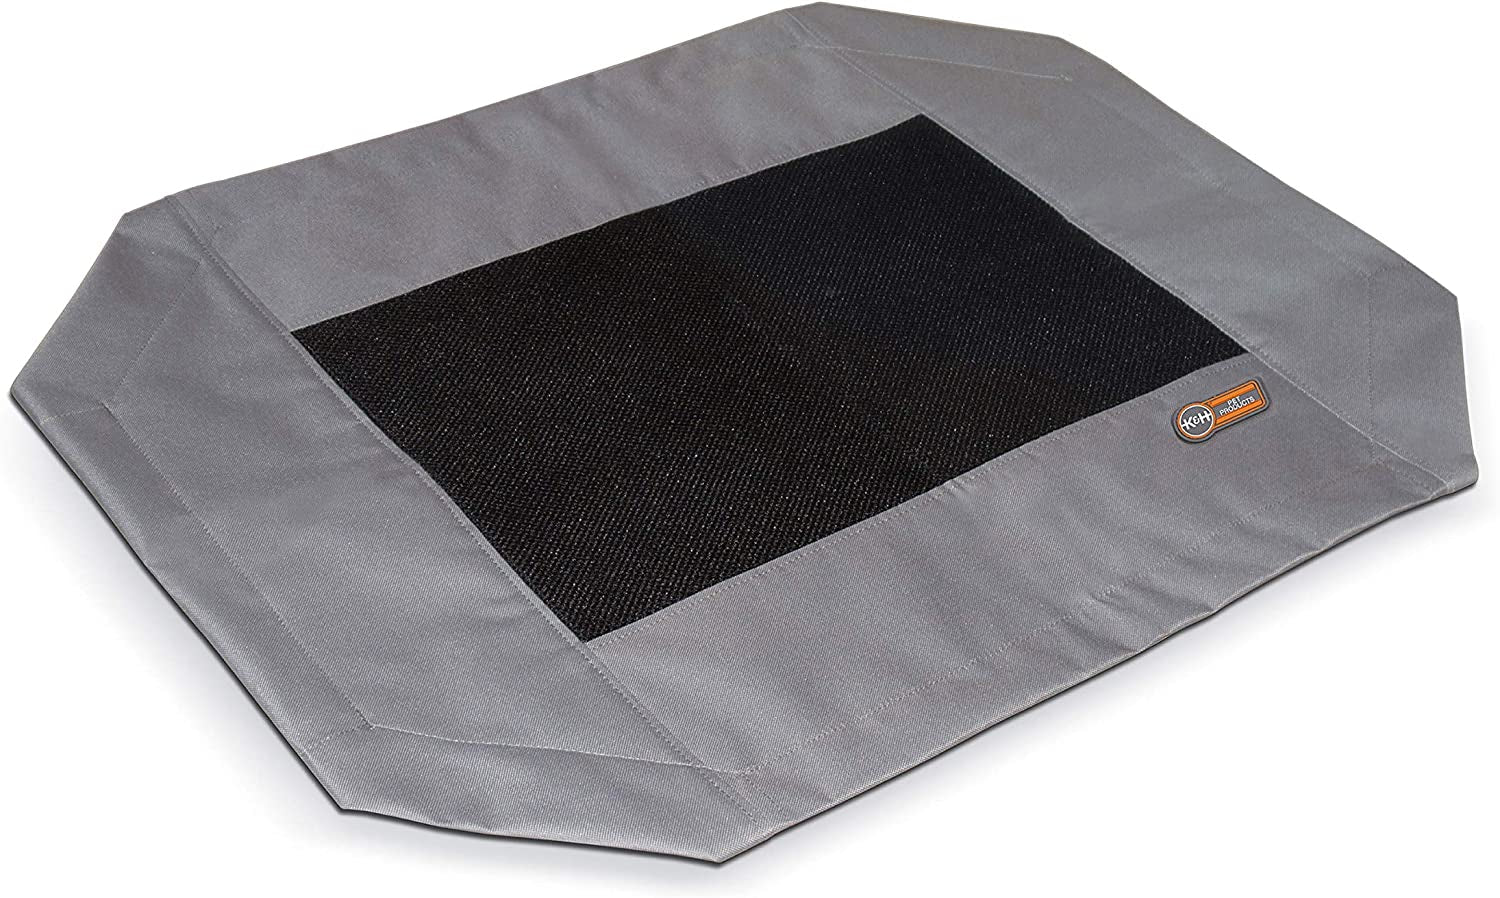 K&H Pet Products Original Pet Cot Replacement Cover (Cot Sold Separately) - Gray/Black Mesh, Medium 25 X 32 Inches